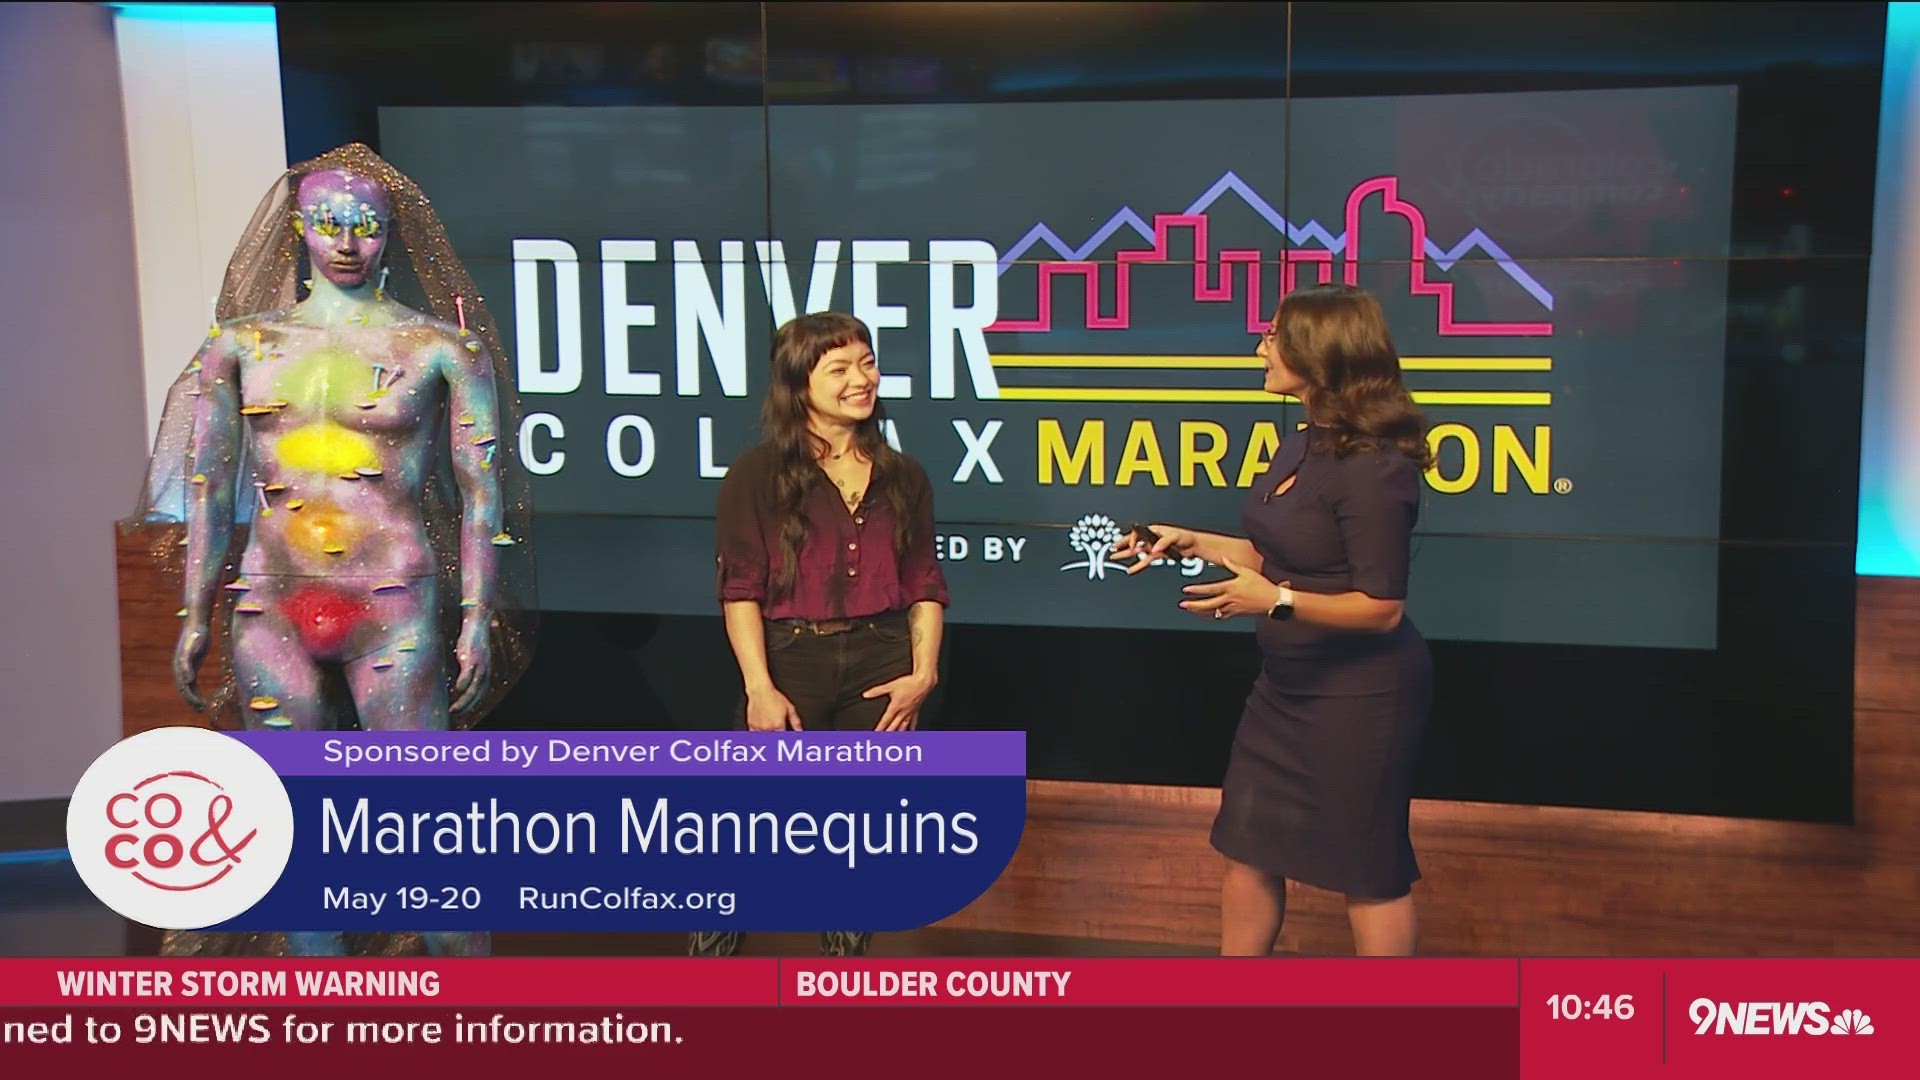 The mannequin contest is a really cool part of the Colfax Marathon. The showing is open to the public. For more info check out RunColfax.org. *PAID CONTENT*